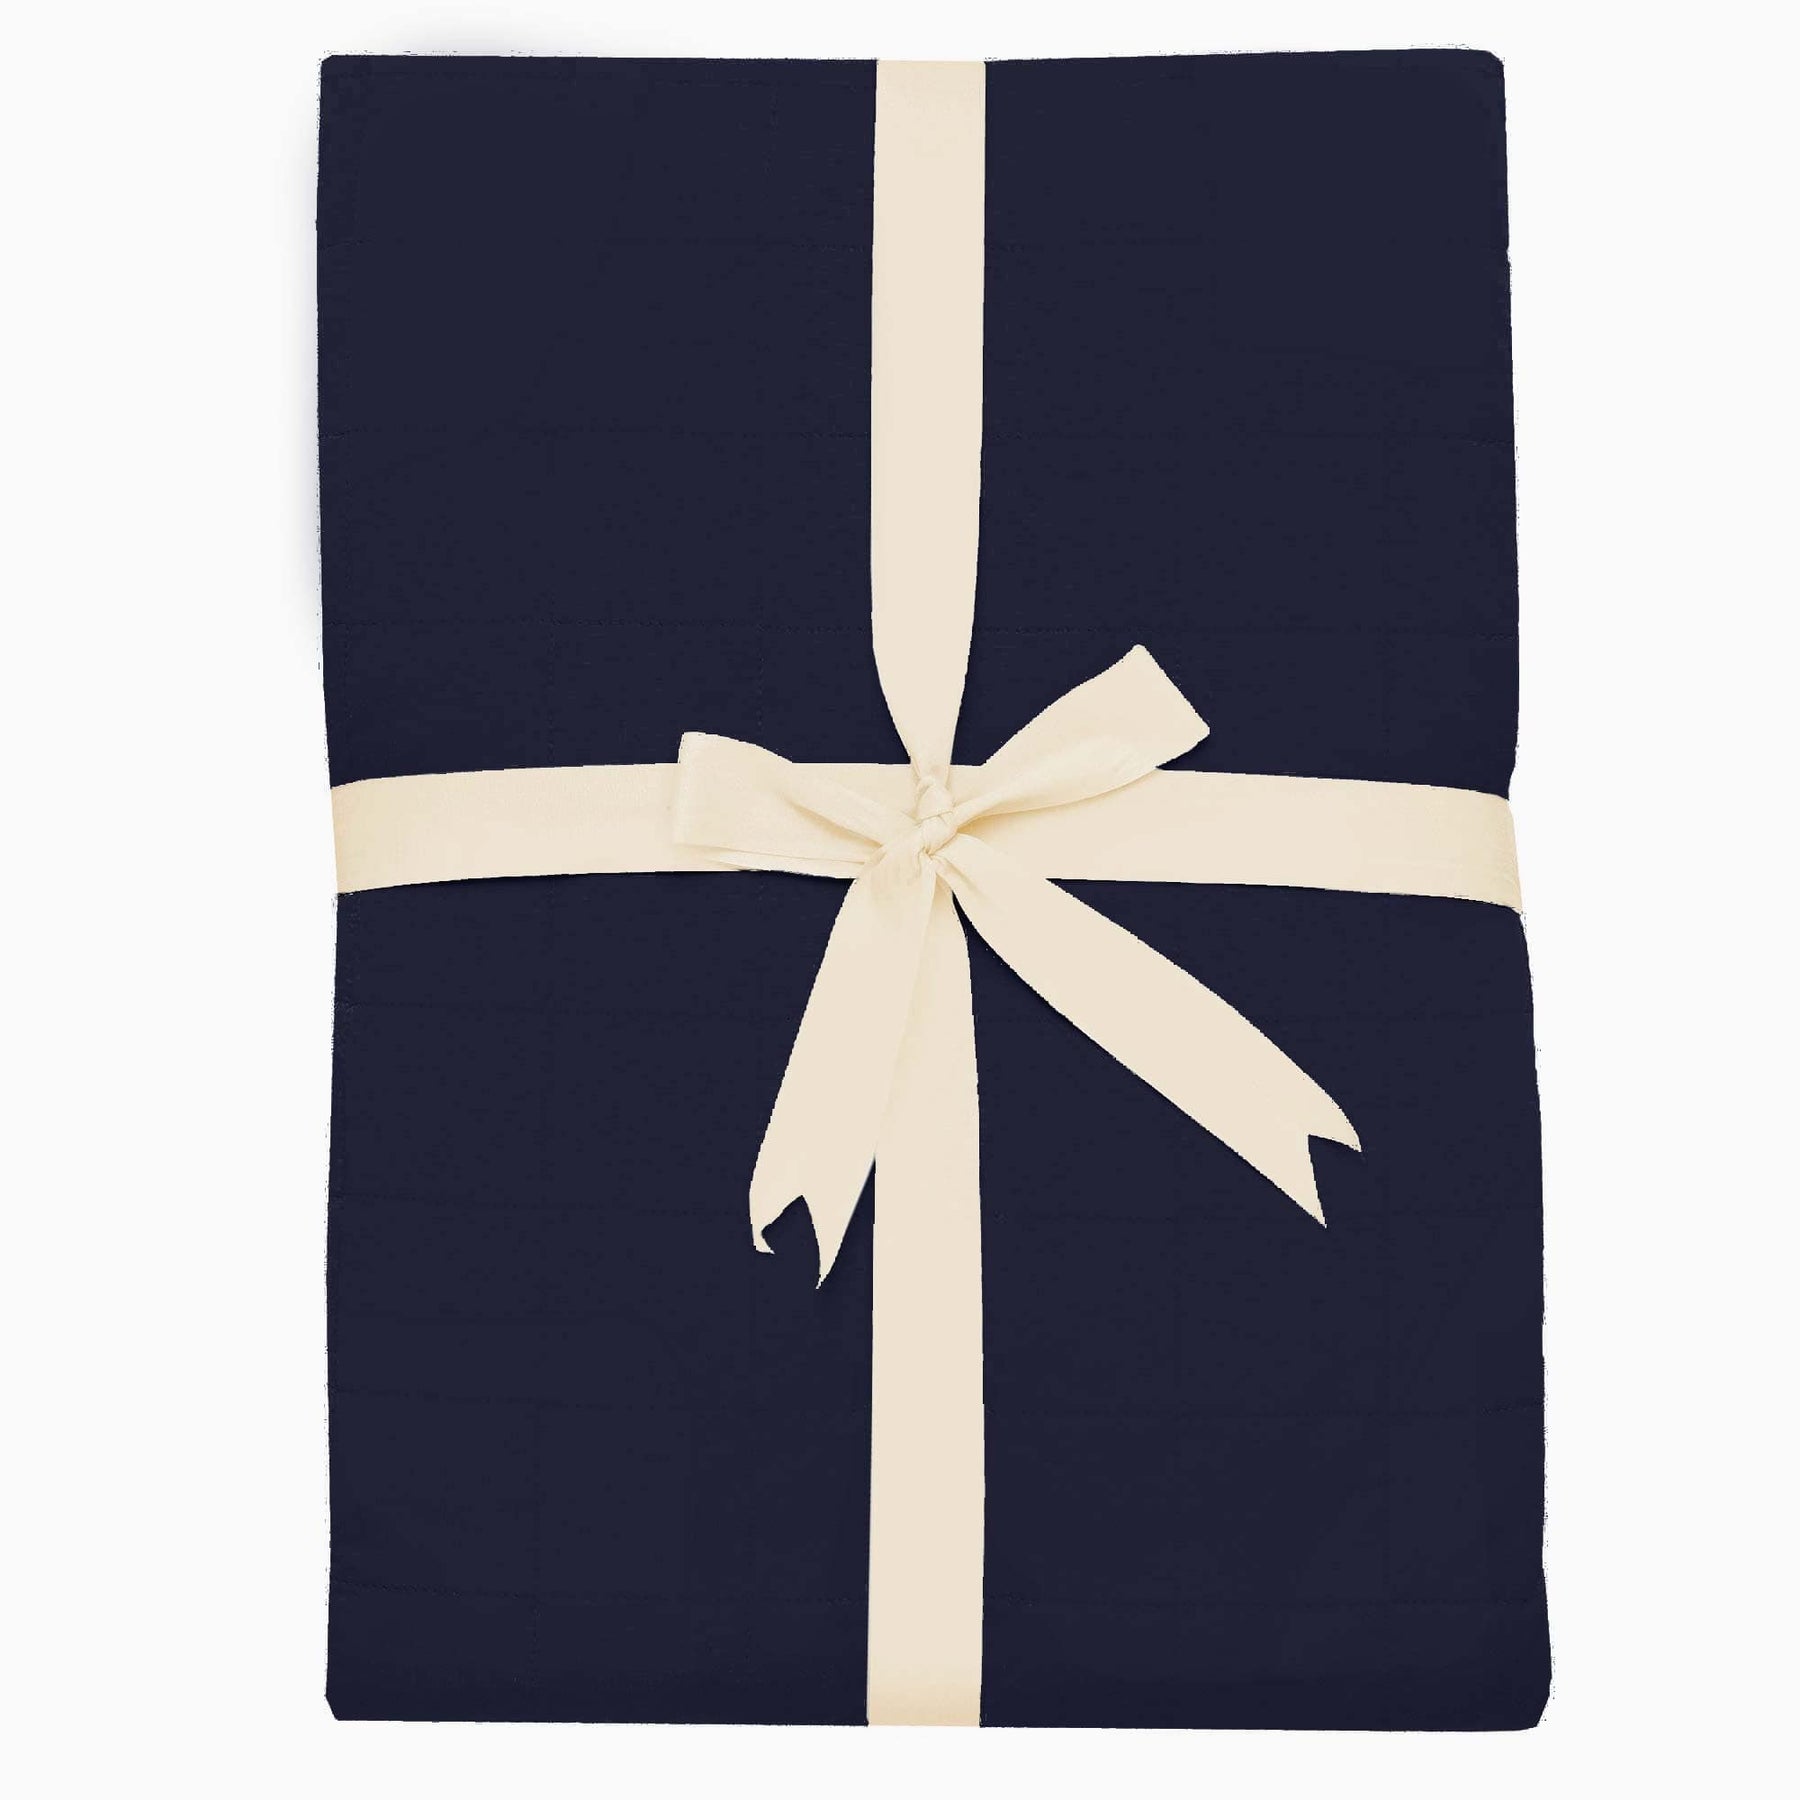 Kyte BABY Adult Blanket 1.0 Navy / Adult Adult Quilted Blanket in Navy 1.0